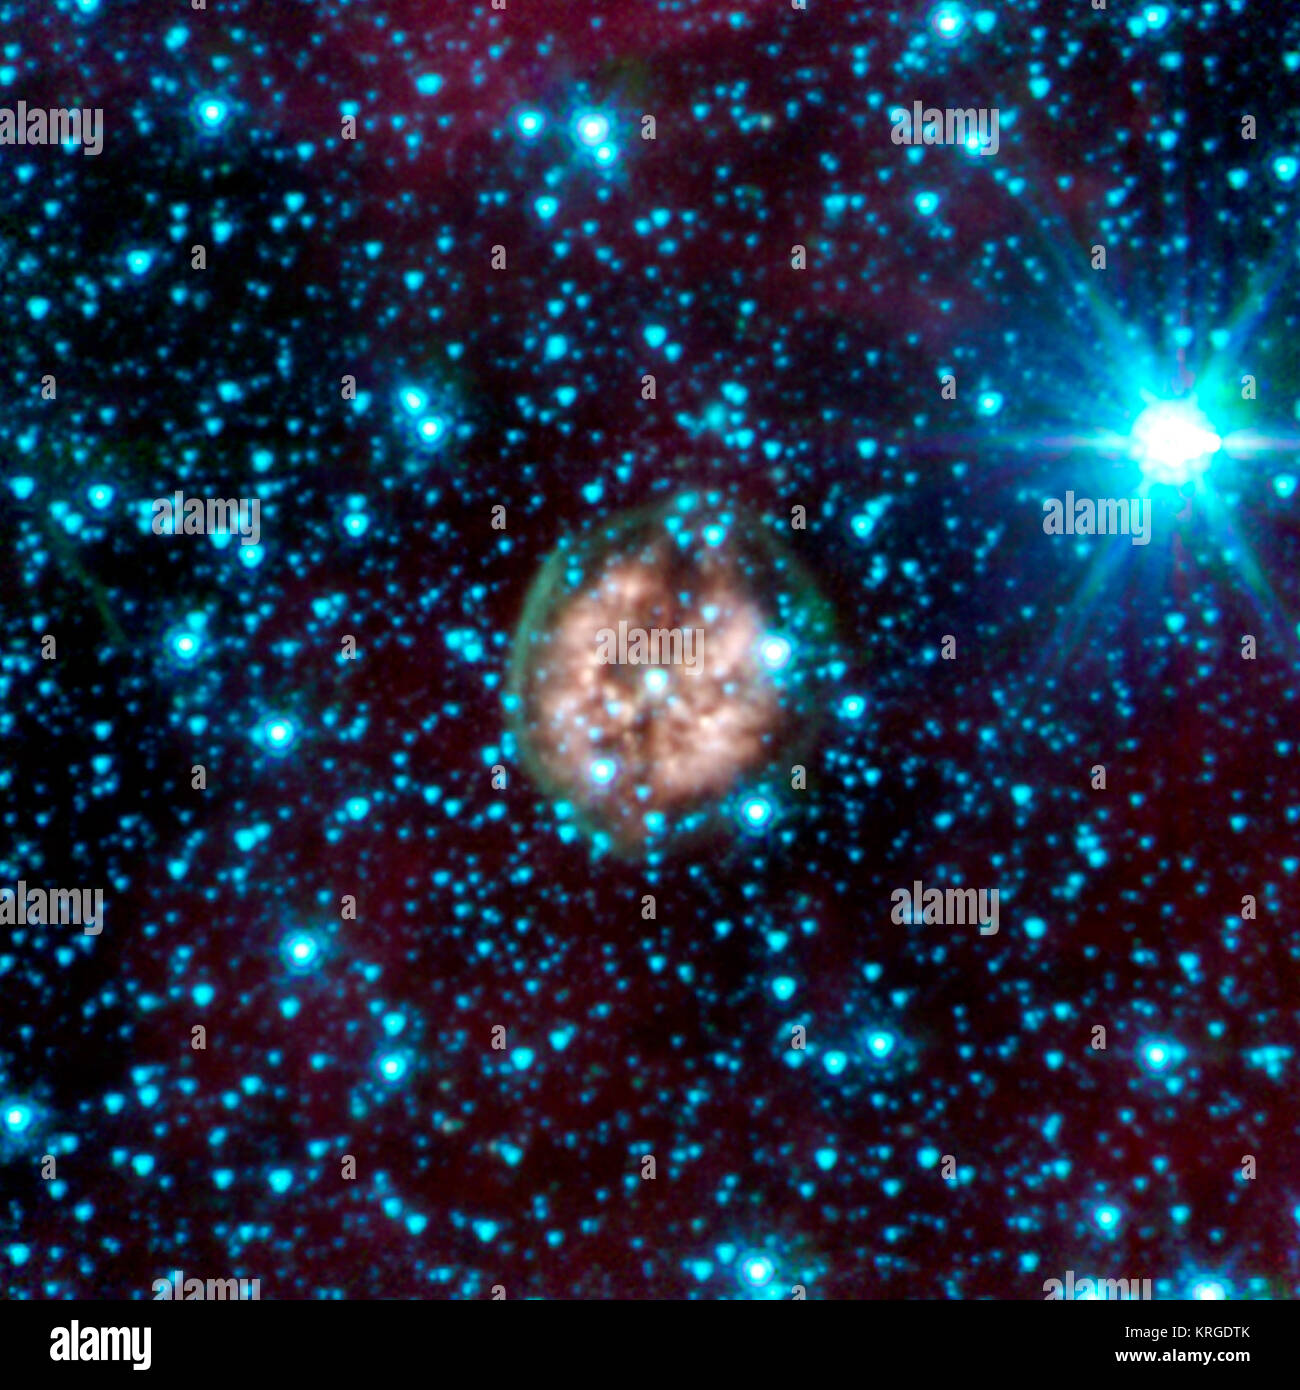 The brain-like orb called PMR 1 has been nicknamed the 'Exposed Cranium' nebula by Spitzer scientists. This planetary nebula, located roughly 5,000 light-years away in the Vela constellation, is host to a hot, massive dying star that is rapidly disintegrating, losing its mass. The nebula's insides, which appear mushy and red in this view, are made up primarily of ionized gas, while the outer green shell is cooler, consisting of glowing hydrogen molecules.  In this image, infrared light at wavelengths of 3.6 microns is rendered in blue, 4.5 microns in green, and 8.0 microns in red. Exposed Cran Stock Photo